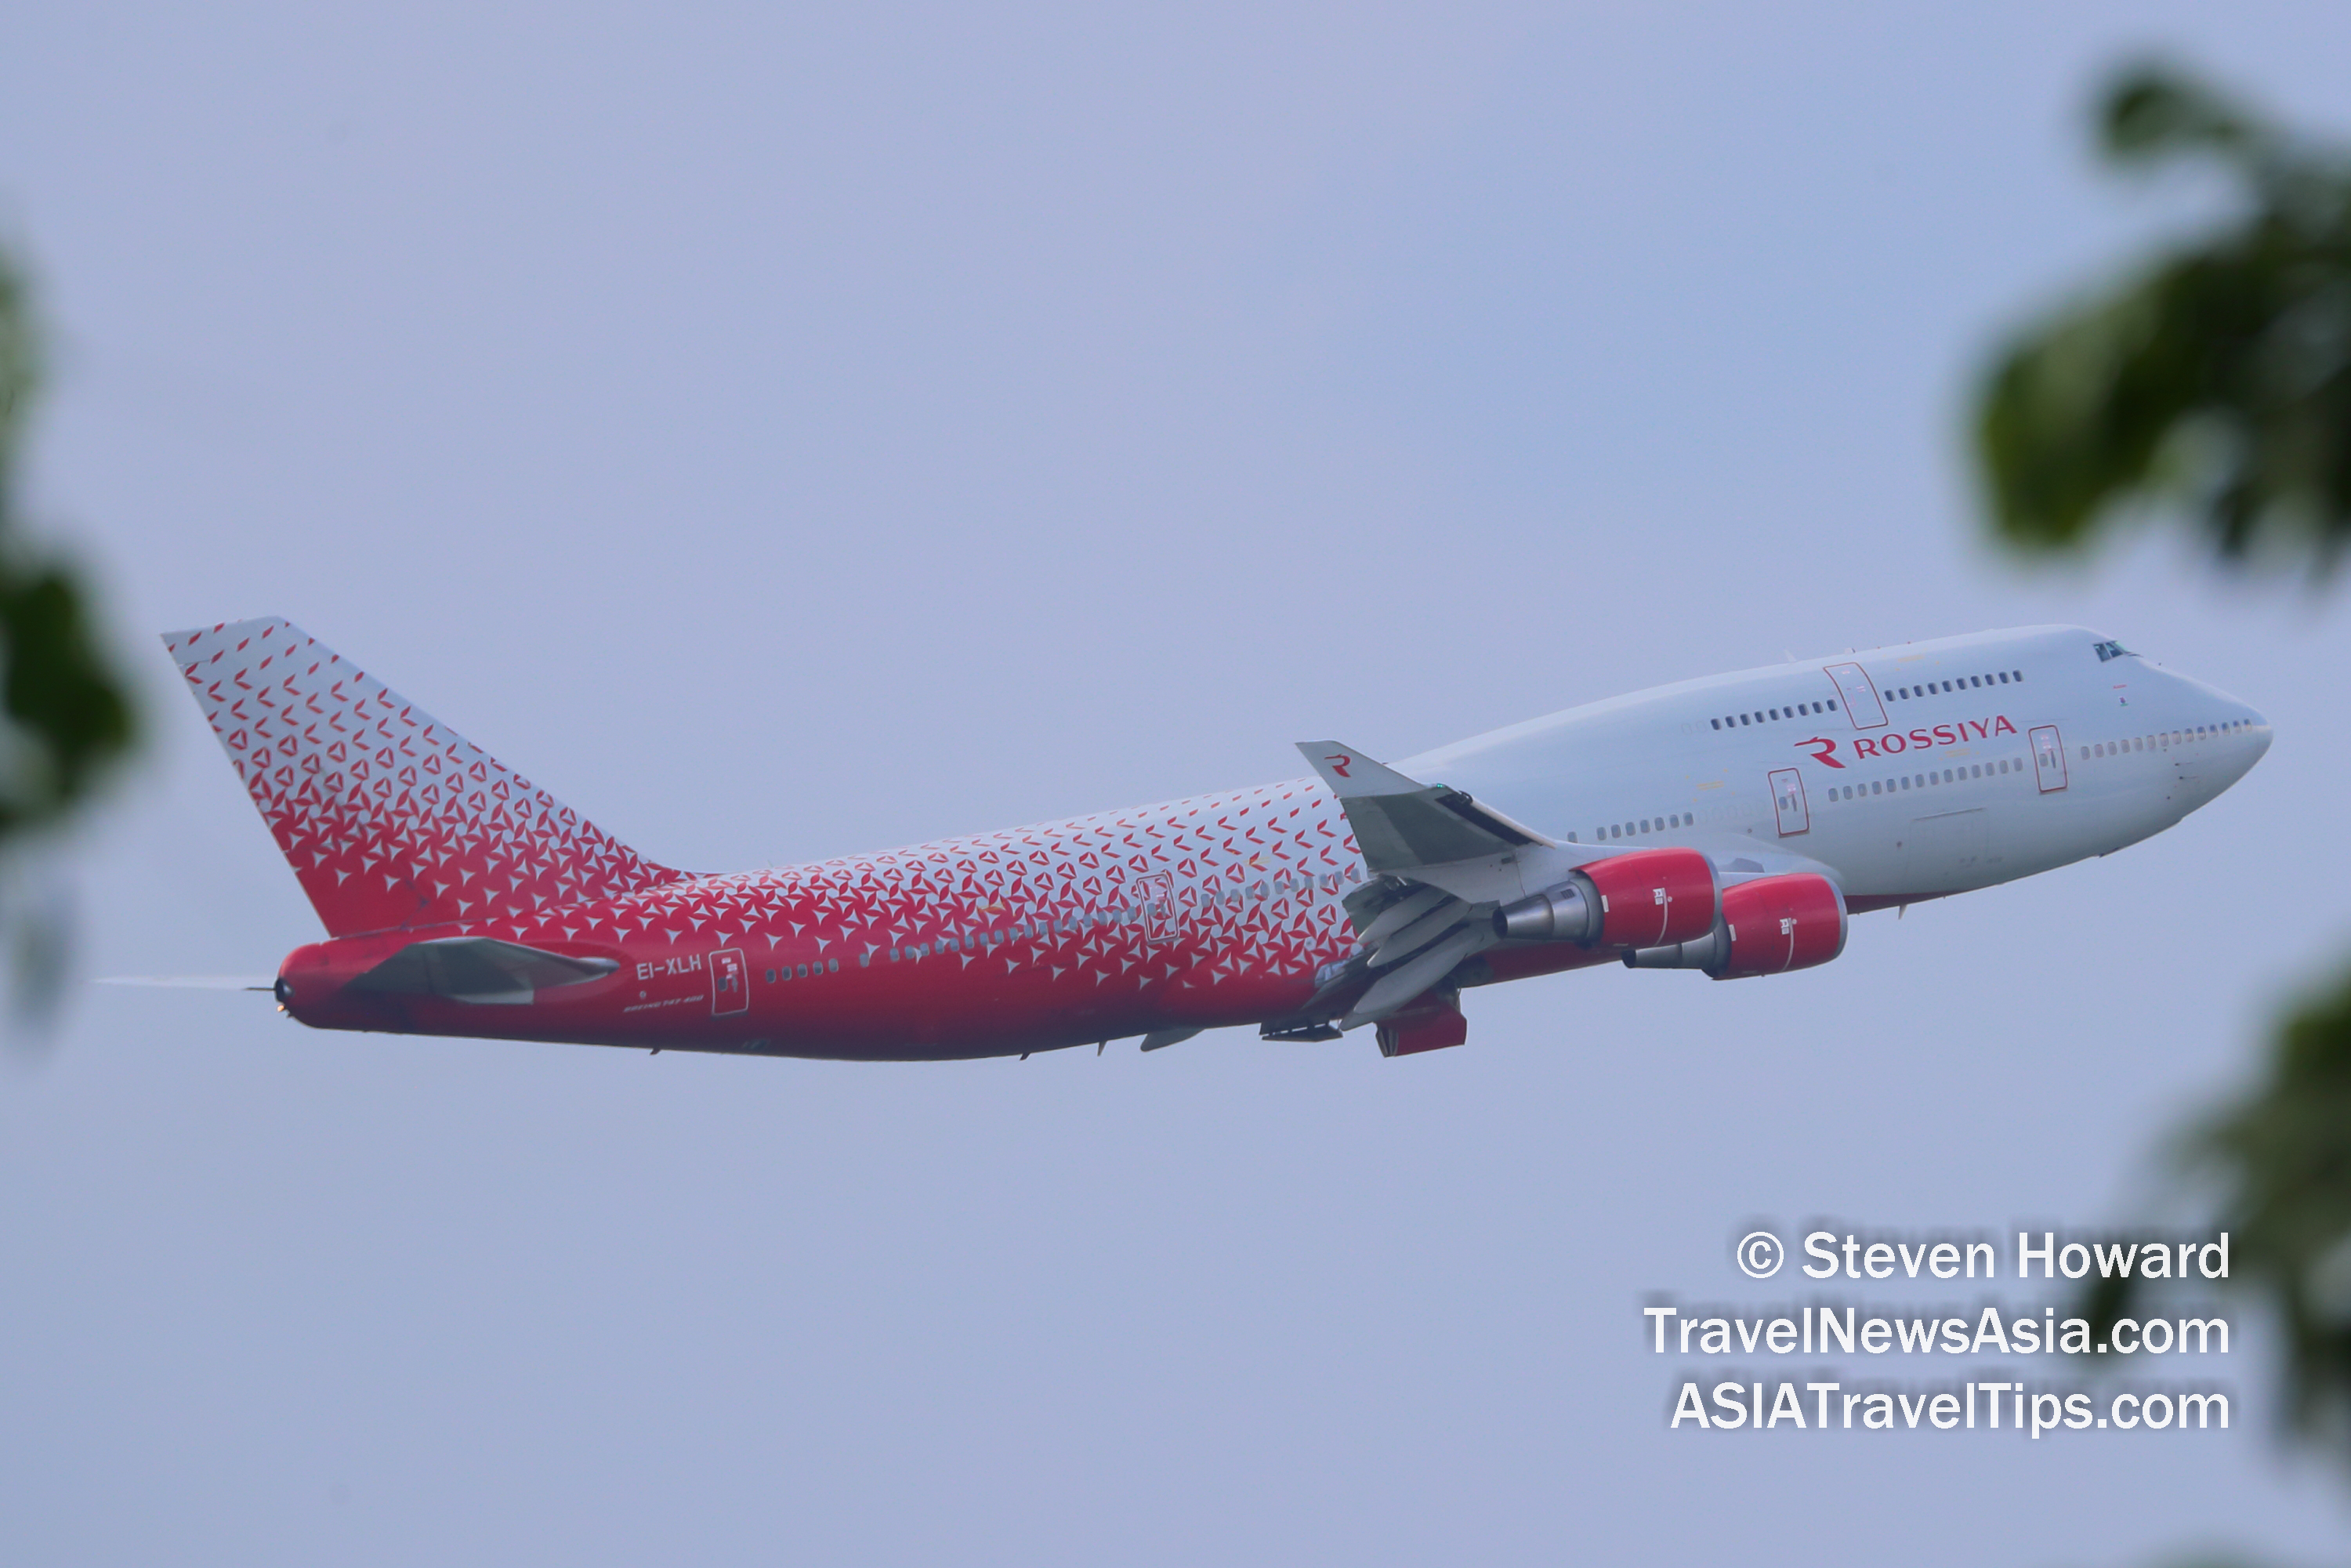 Rossiya Boeing 747-400 reg: EI-XLH taking of from Suvarnabhumi Airport near Bangkok on 9 October 2019. Picture by Steven Howard of TravelNewsAsia.com Click to enlarge.